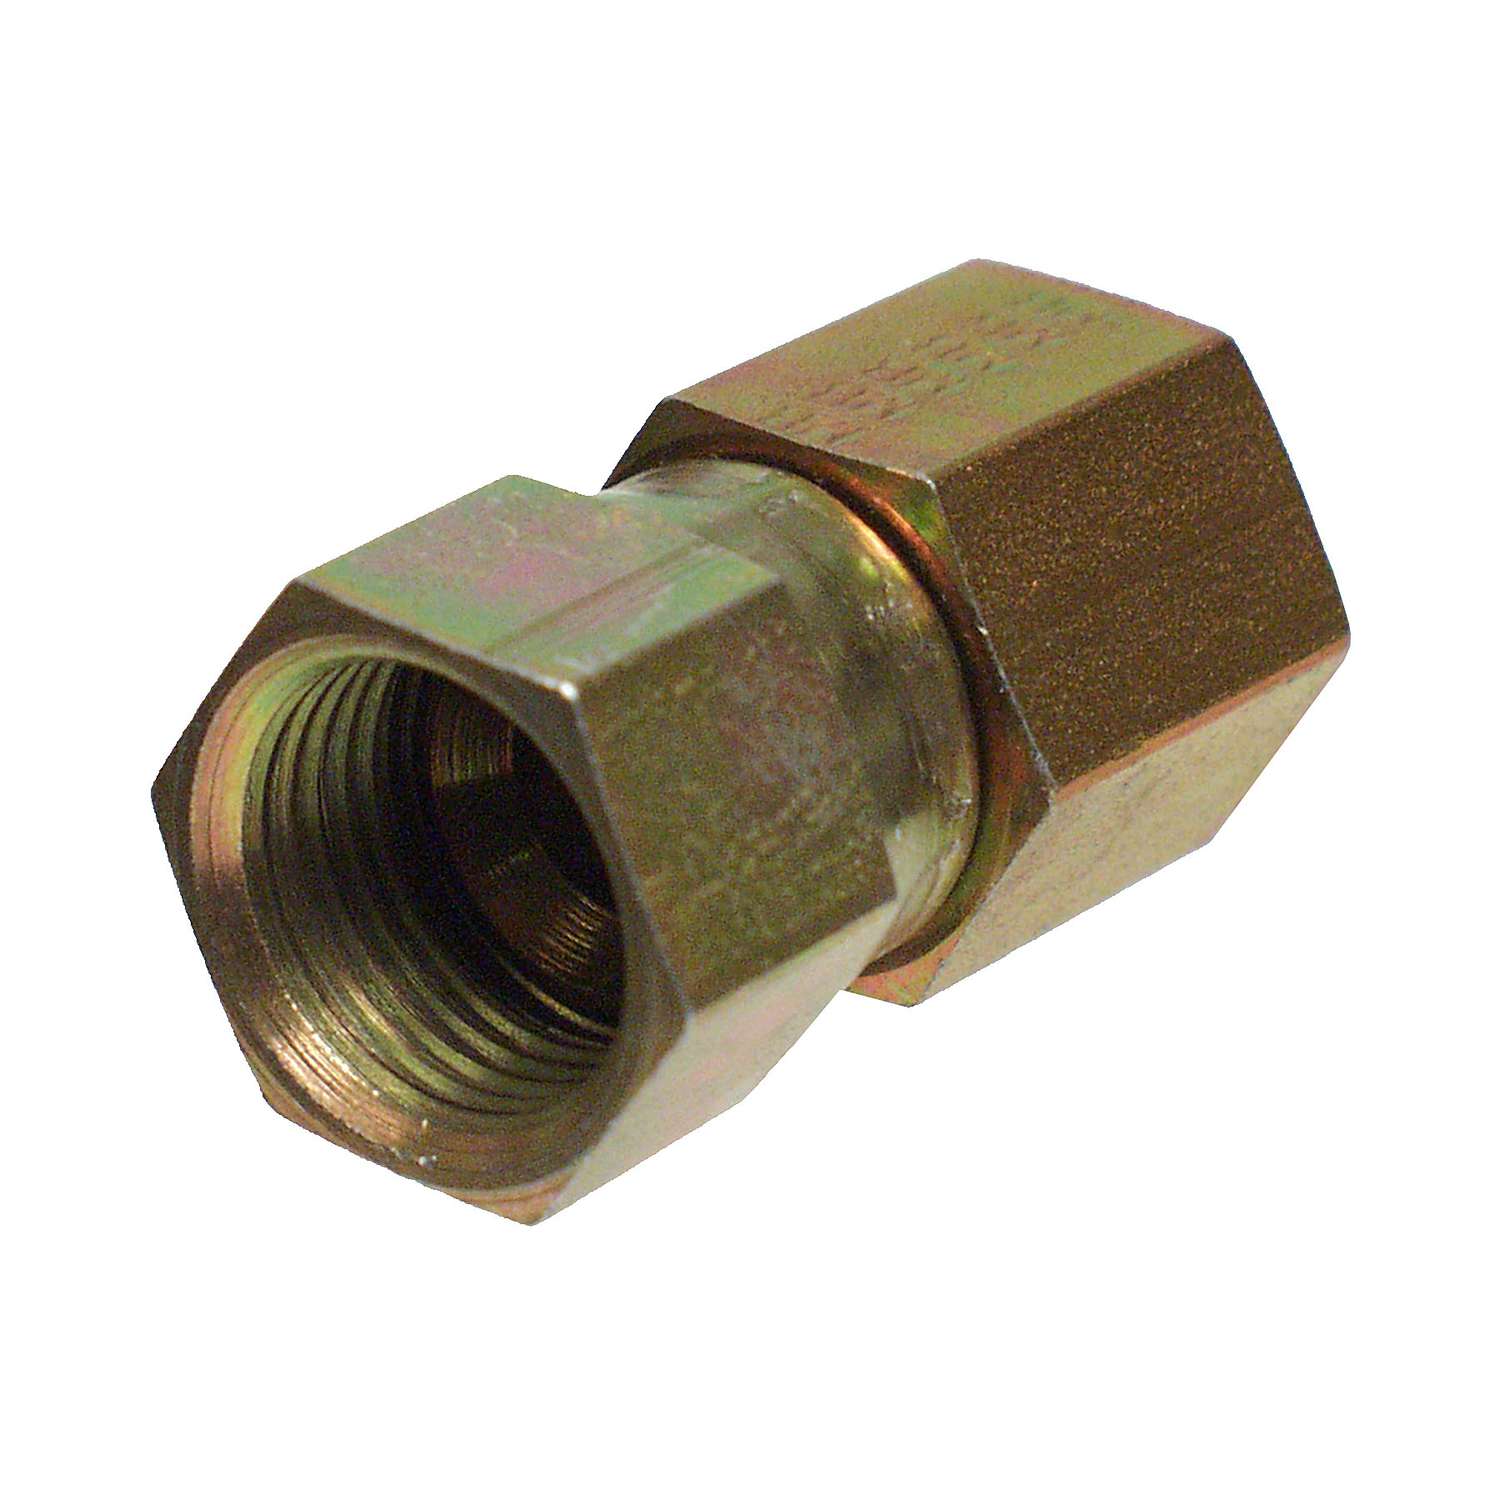 3 Ace Hardware 3/4” Hose Adapter Swivel To Any Position On Spigot #73811 